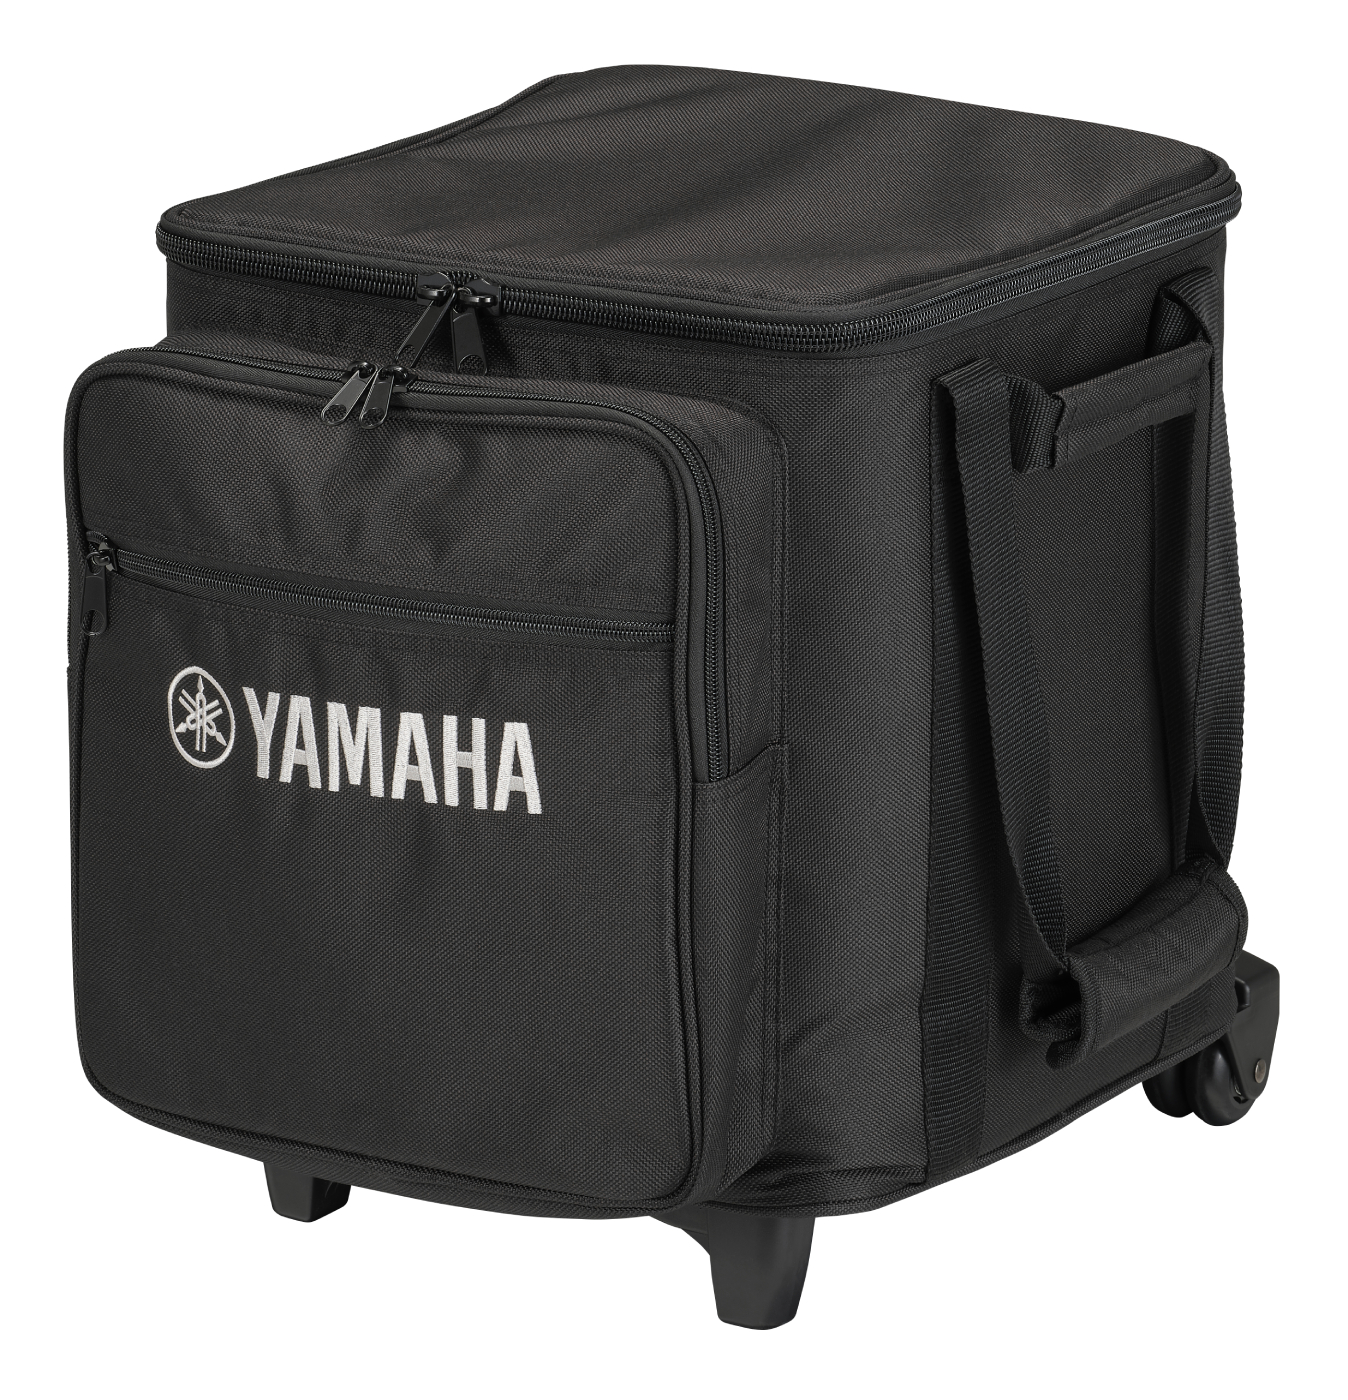 Yamaha Stagepas 200 Btr (avec Batterie)  + Valise Pour Stagepas 200 - Complete PA system - Variation 2